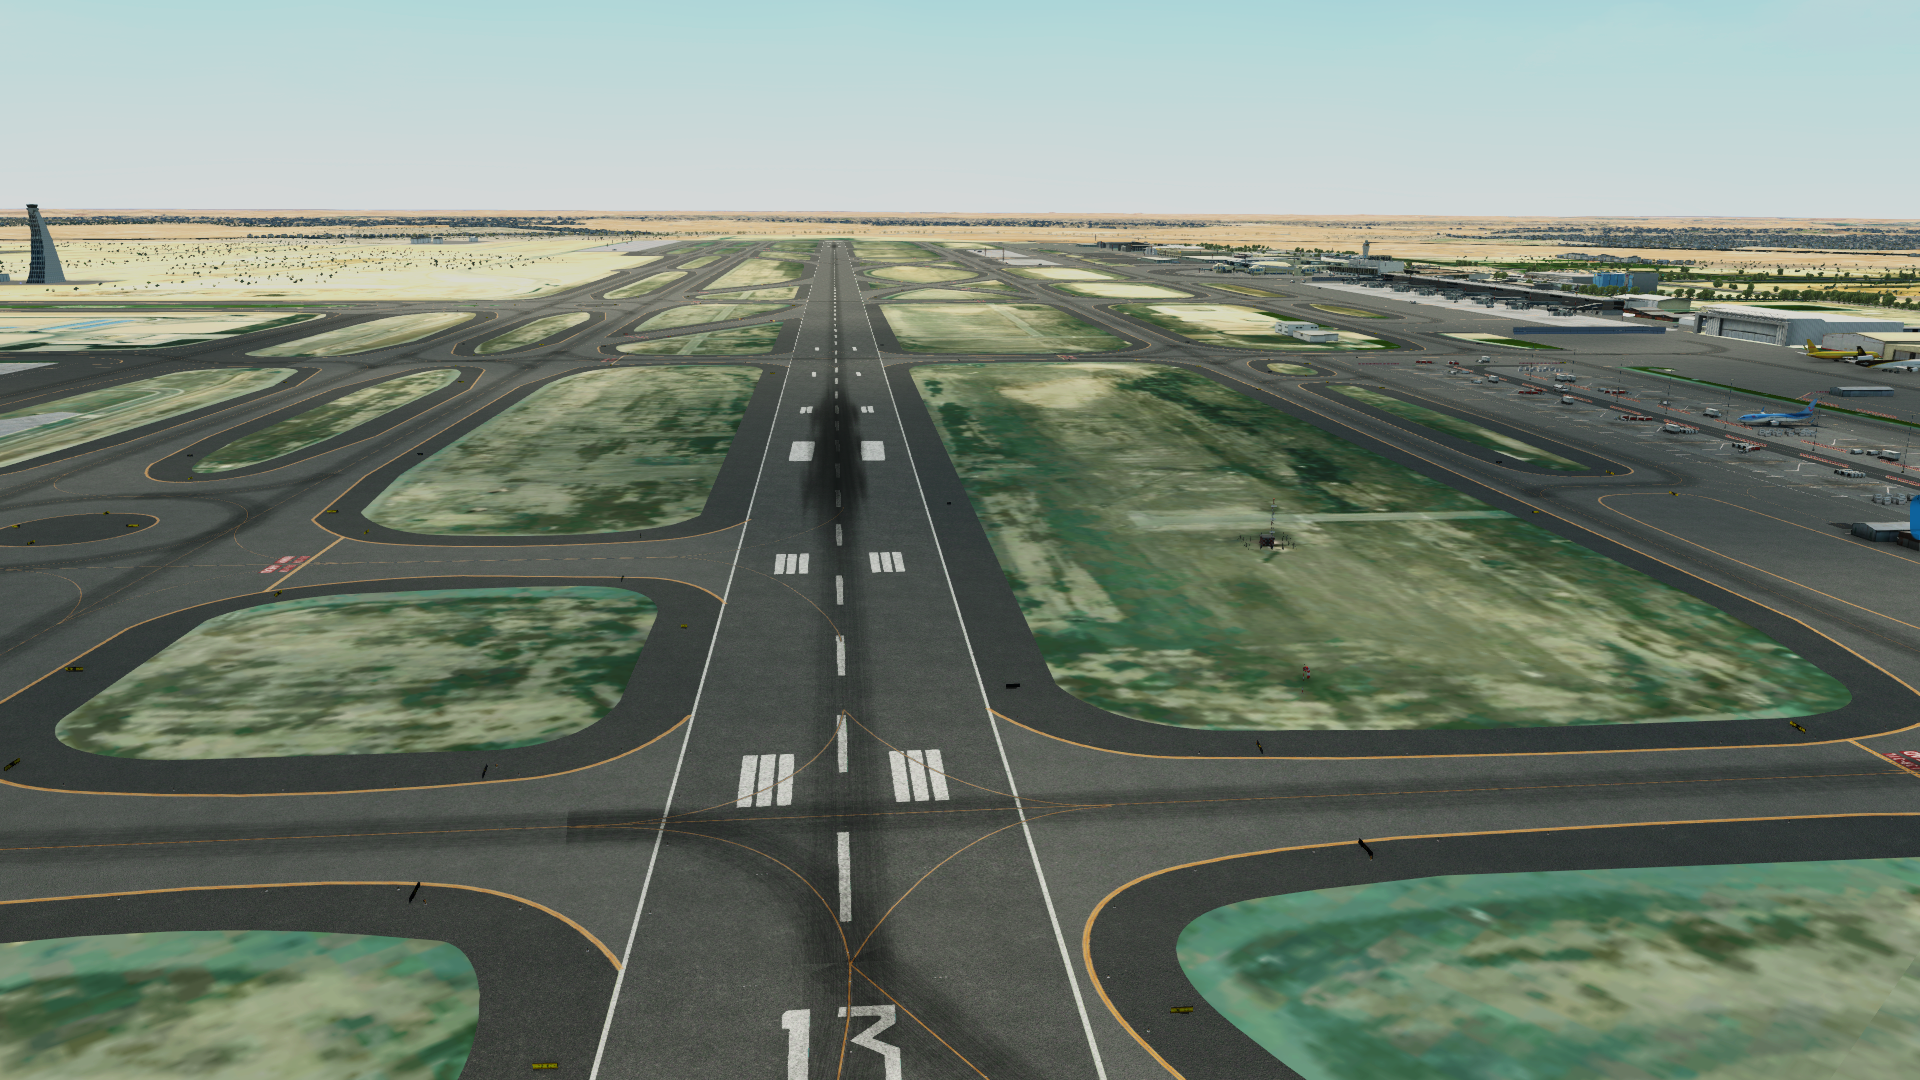 TaiModels Releases Abu Dhabi International Airport for XP11 - TaiModels